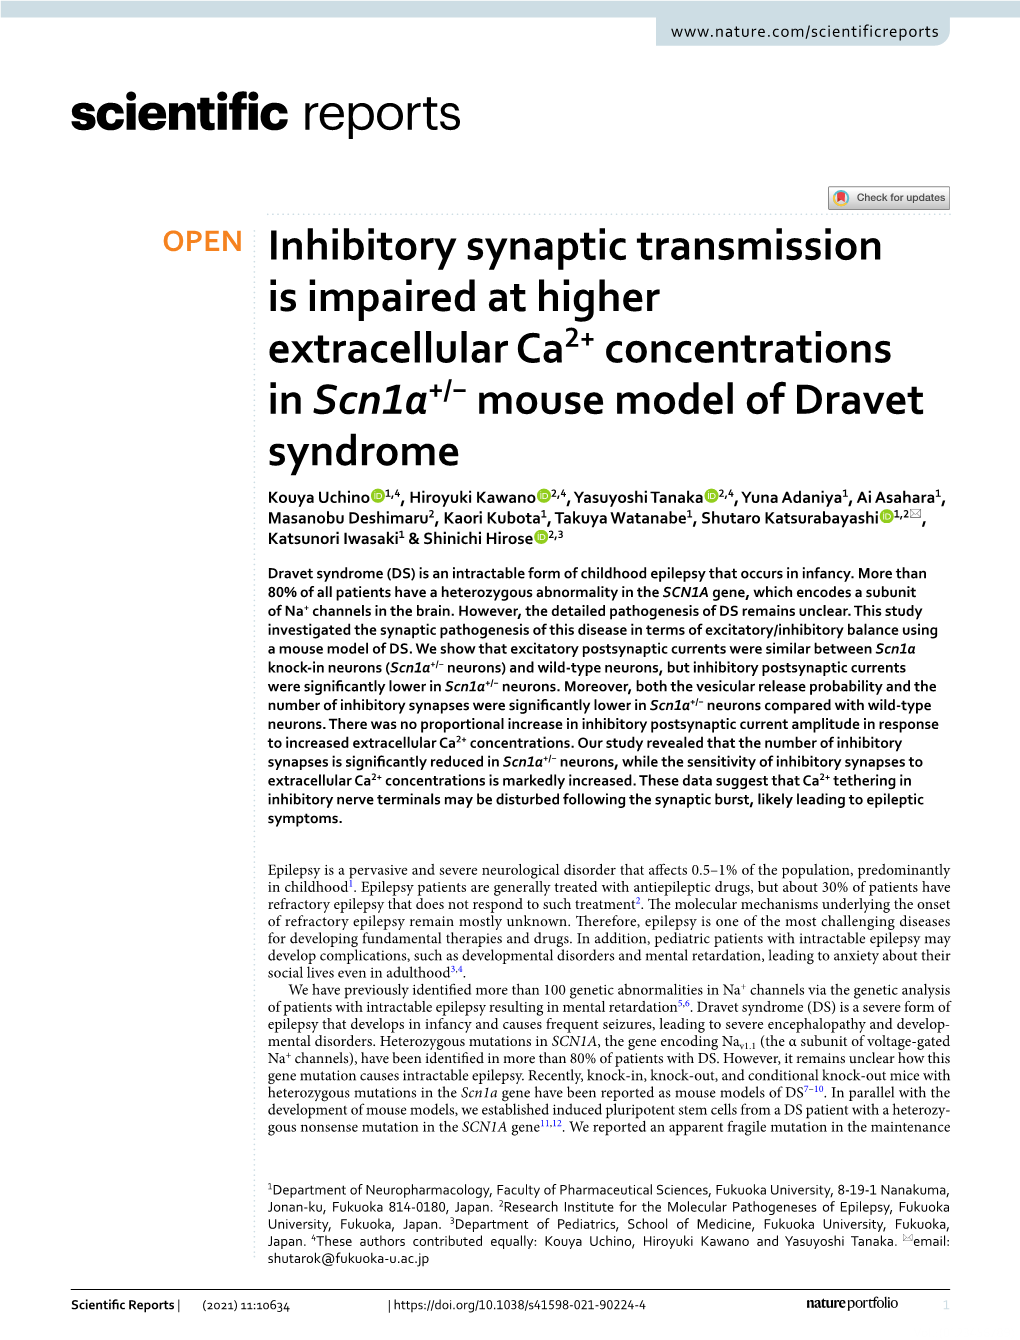 Inhibitory Synaptic Transmission Is Impaired at Higher Extracellular